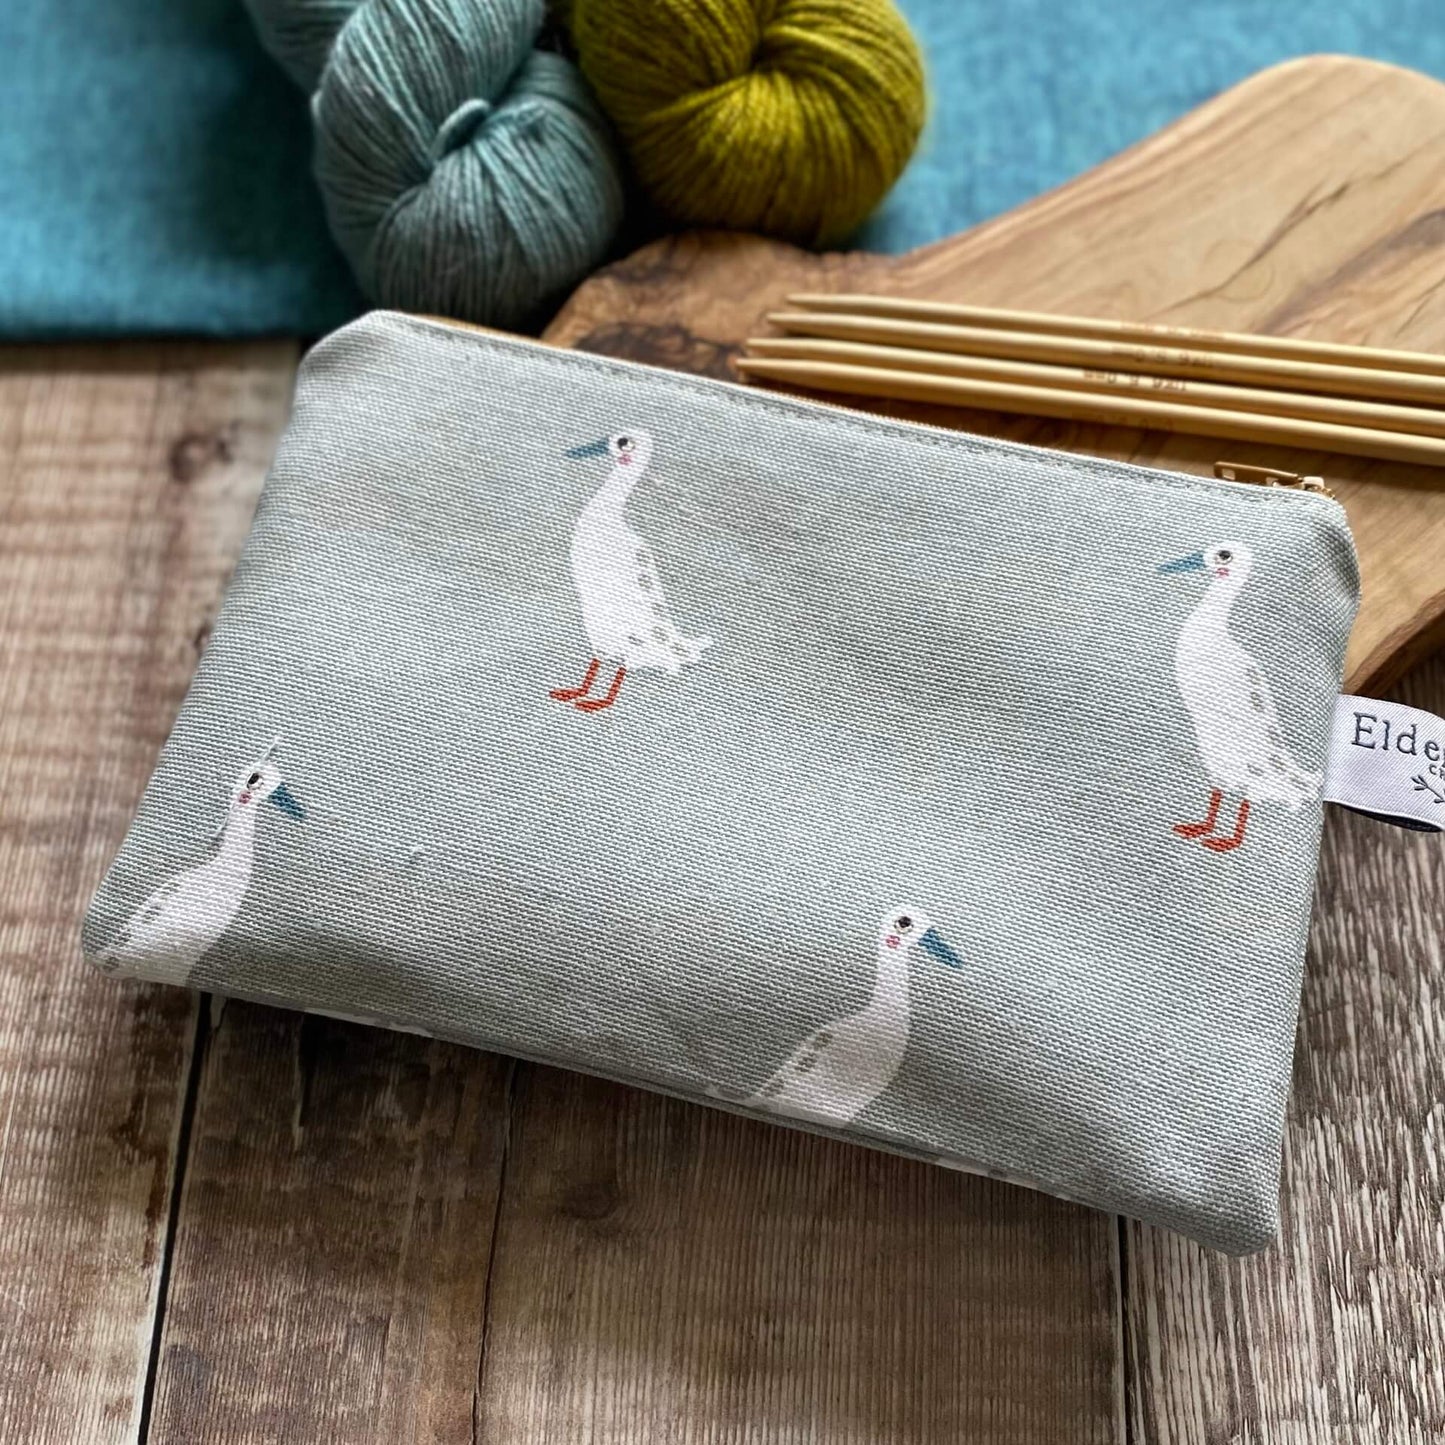 A small zippered pouch for knitting notions, which features some waddling runner ducks, sits on a wooden table next to two skeins of yarn, one blue the other green, and some knitting needles. The pouch has been hand made by Eldenwood Craft. 